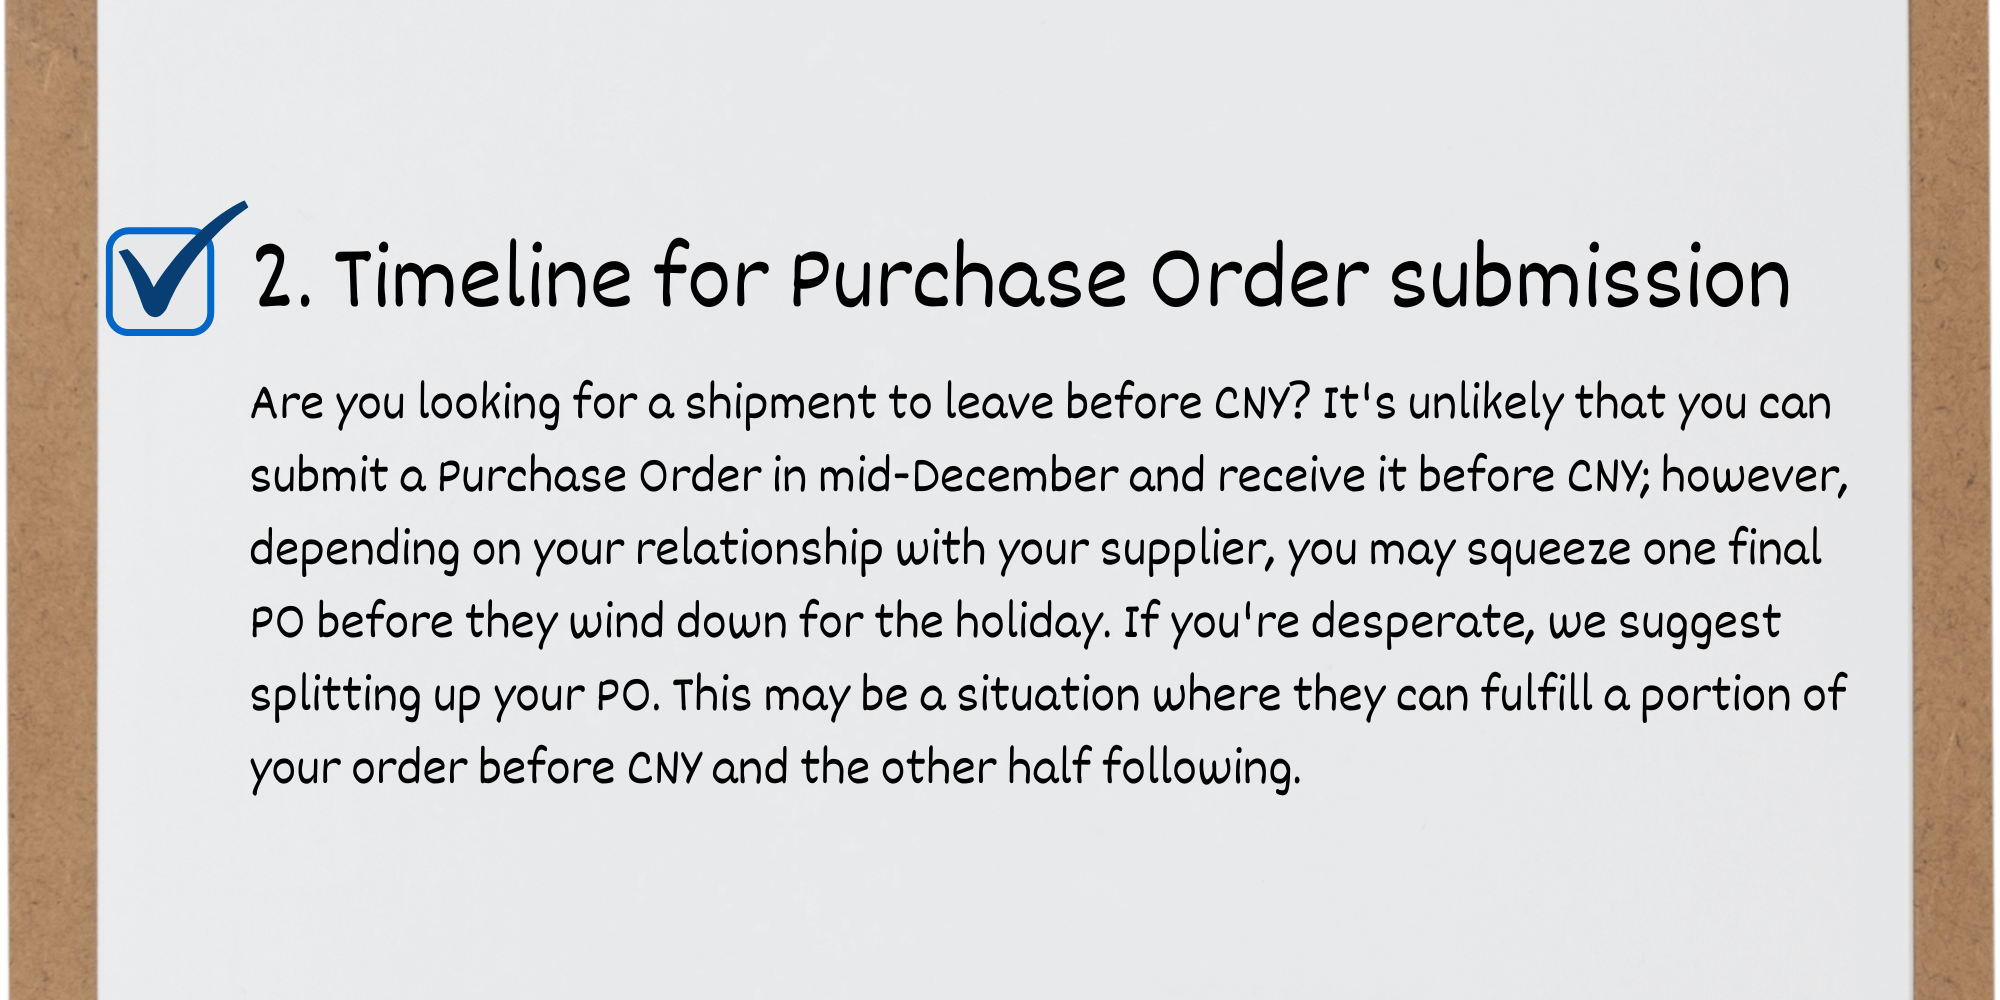 2.-Timeline-for-Purchase-Order-submission.png